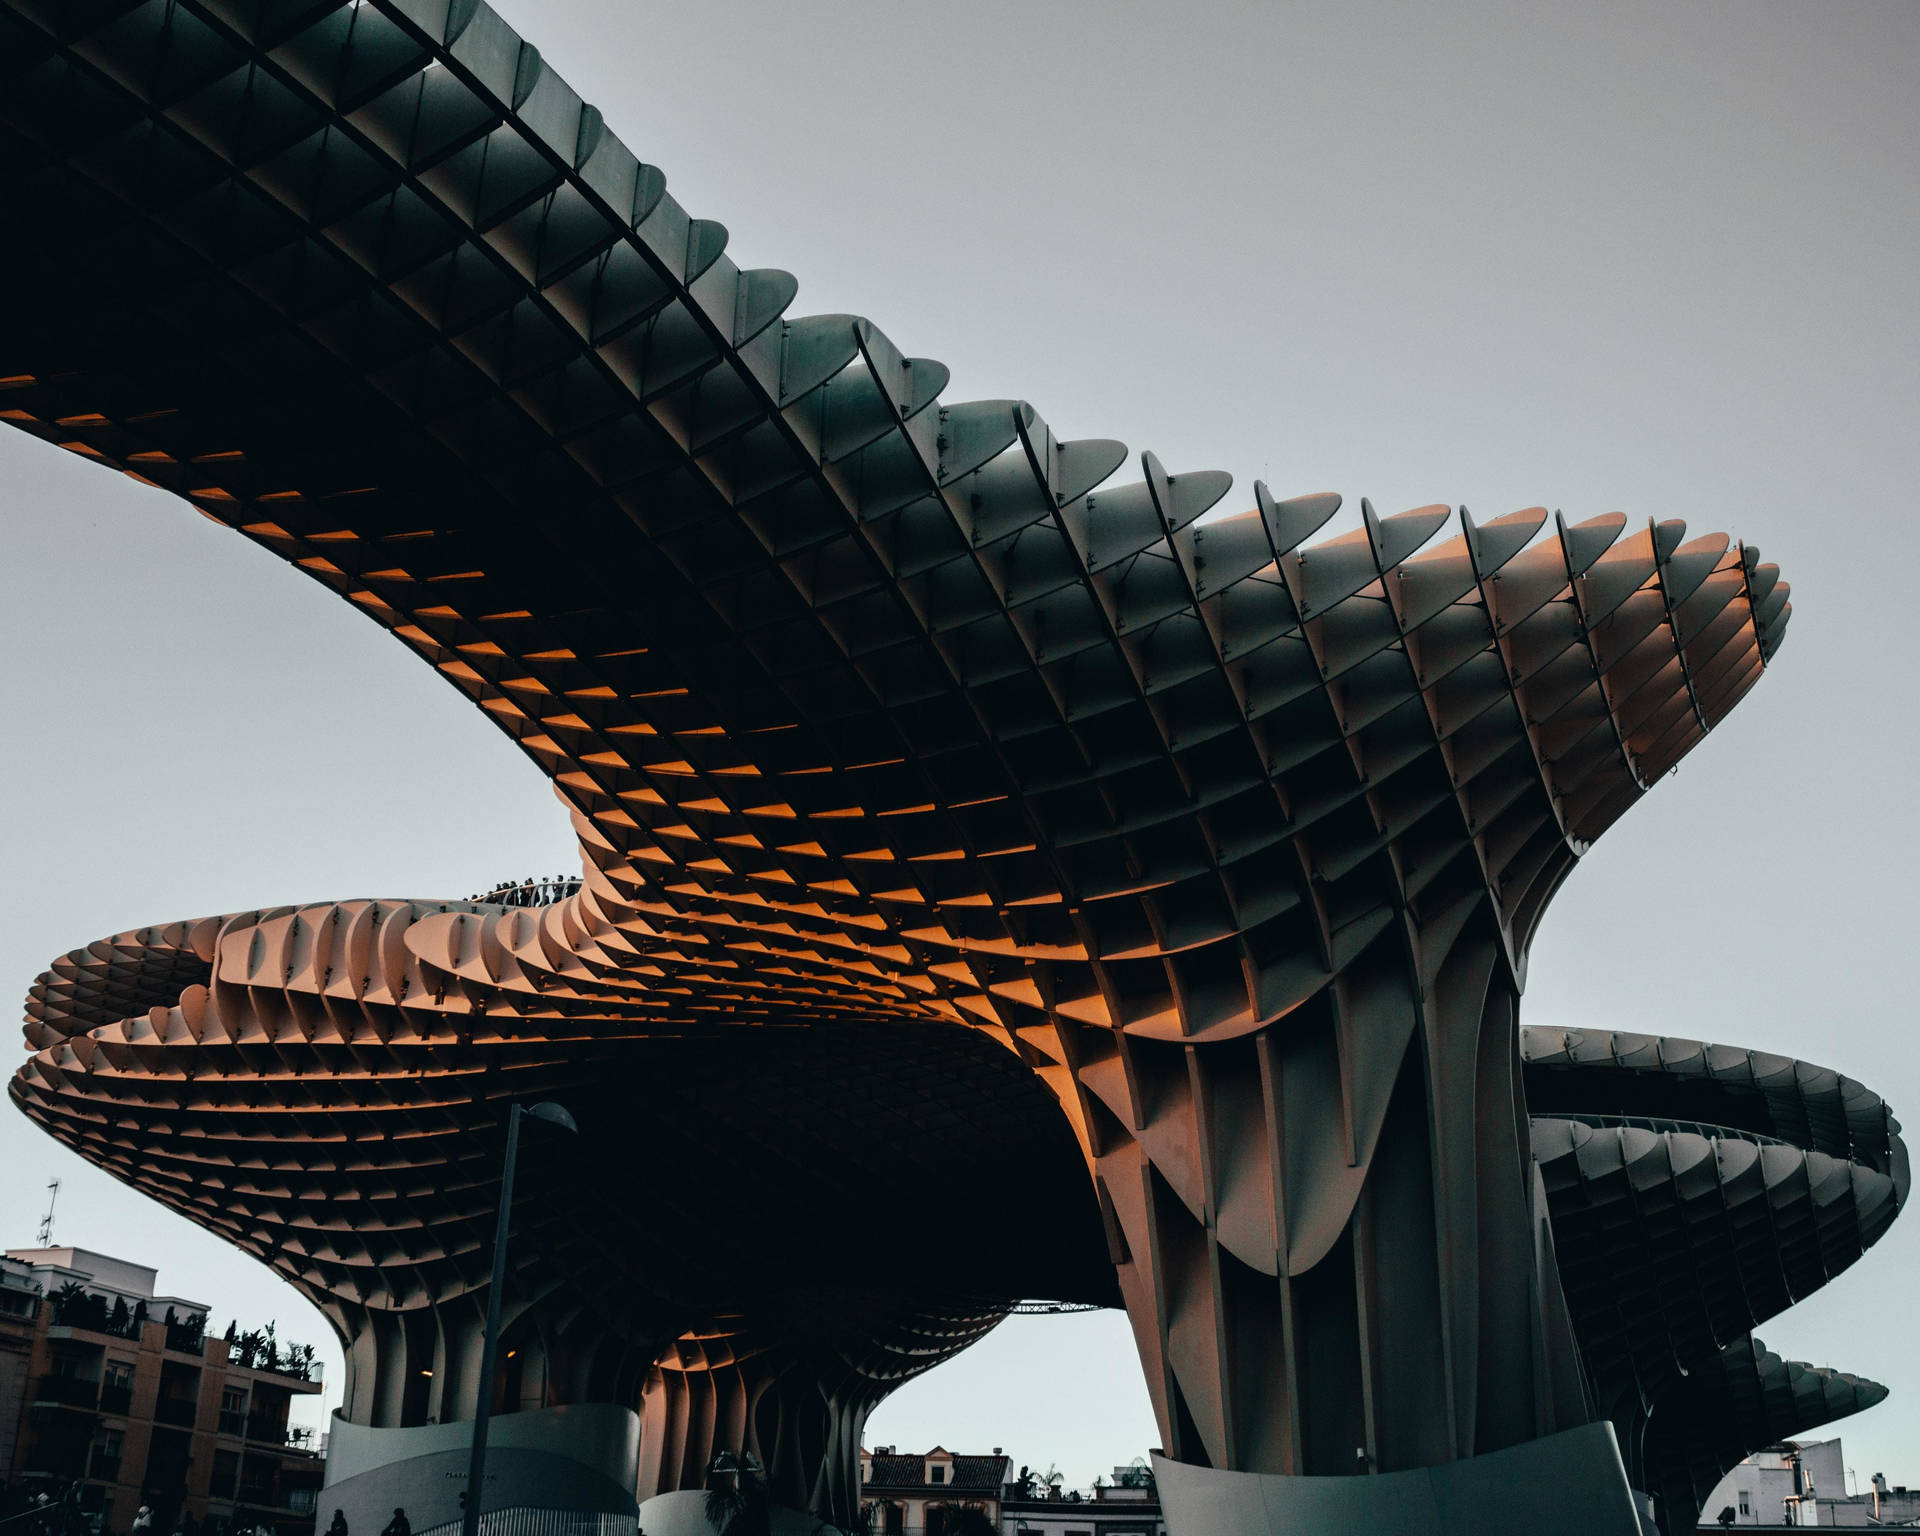 100+ Architecture Pictures [HQ] | Download Free Images on Unsplash